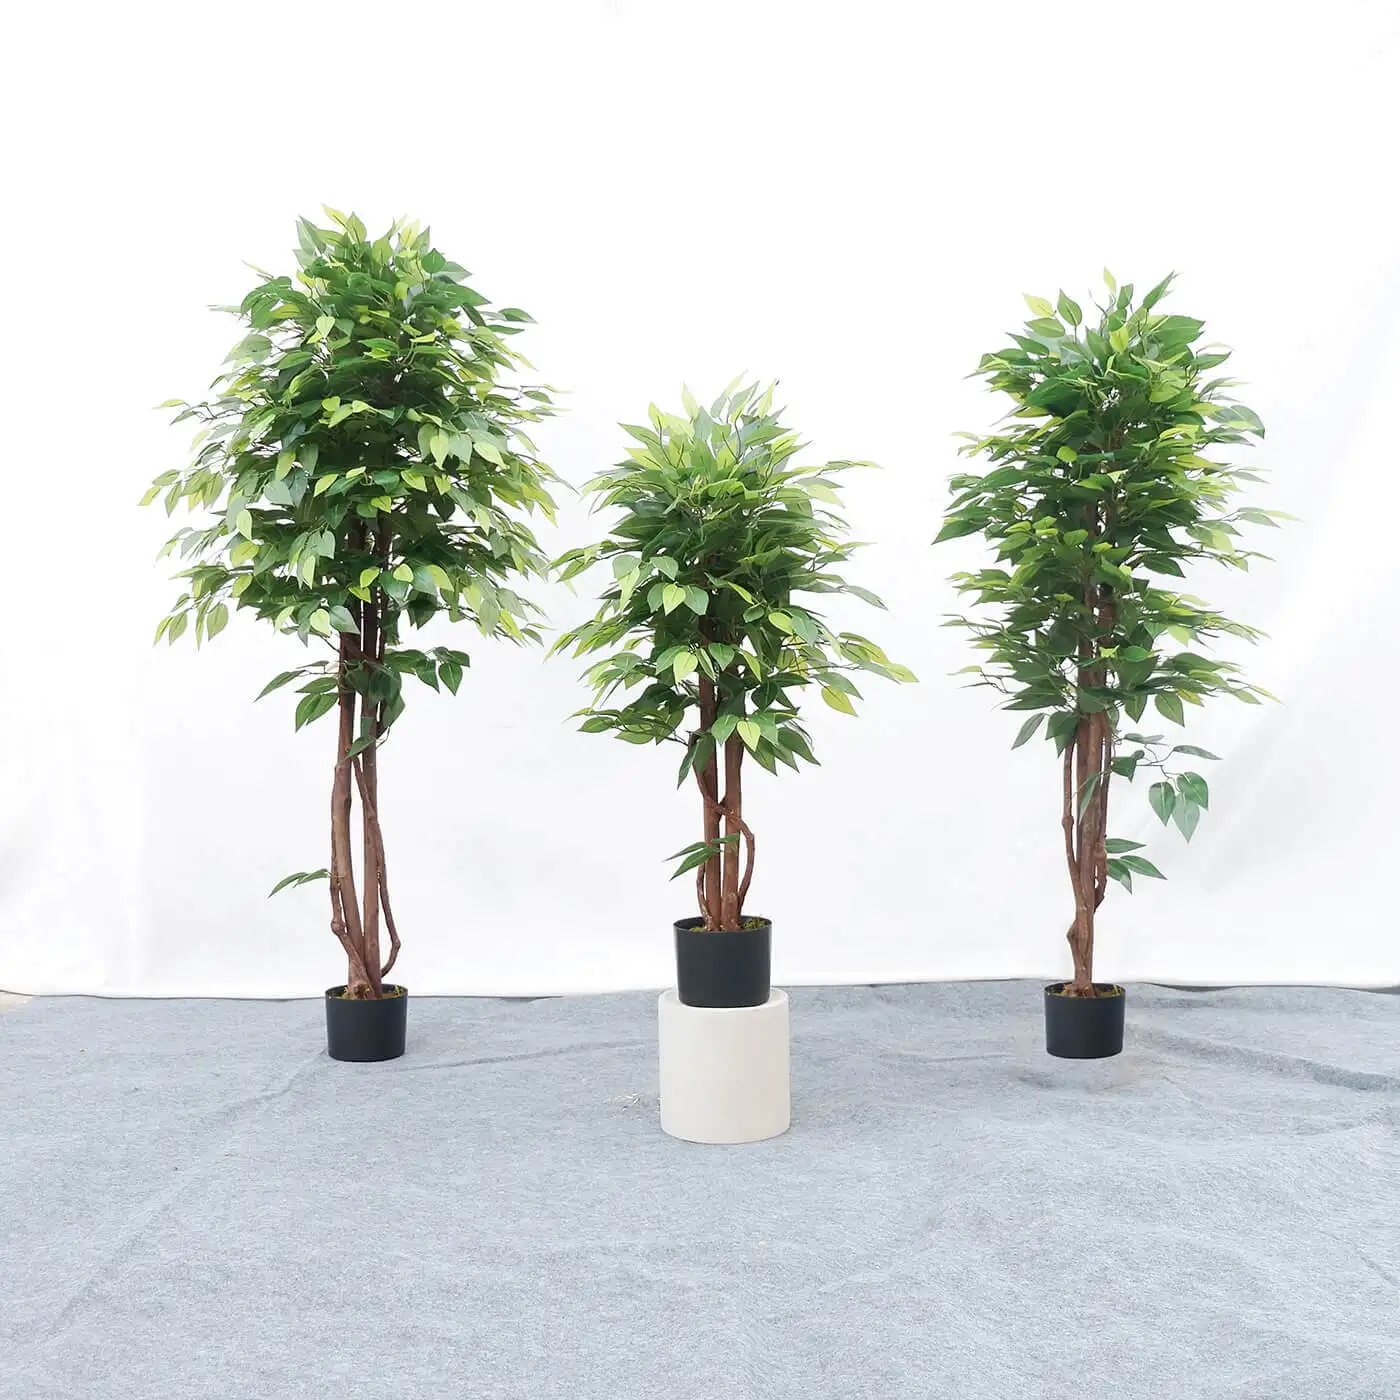 Hot sale factory supply good quality green artificial banyan tree ficus leaf tree ficus microcarpa bonsai for decoration